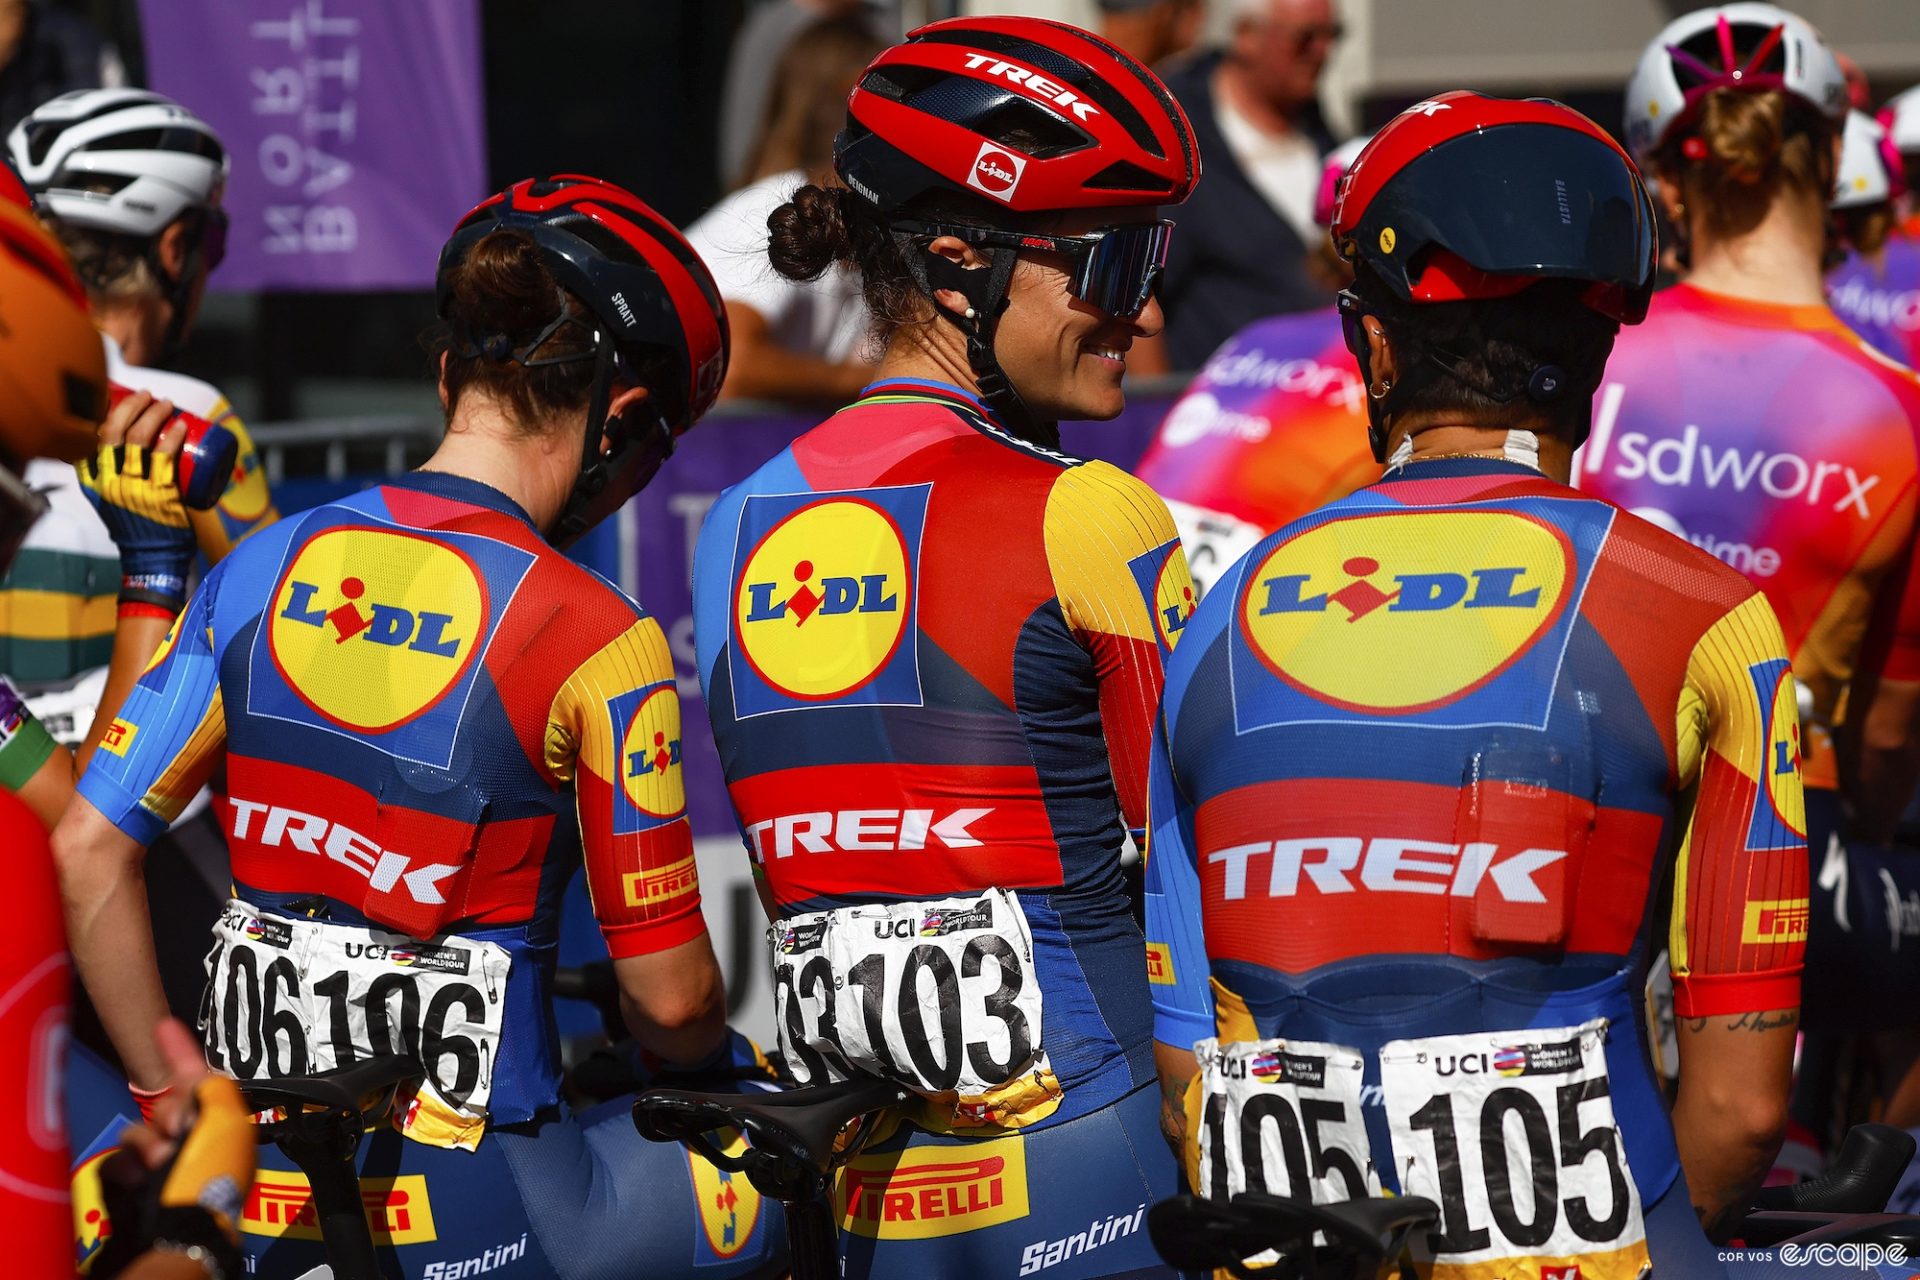 Three Lidl-Trek riders laugh together while waiting for a race to start. The back of the jerseys show the color blocking, with a yellow Lidl circle surrounded by slanted blocks of blues and red, a red band around the center with the Trek logo, and a blue lower third.